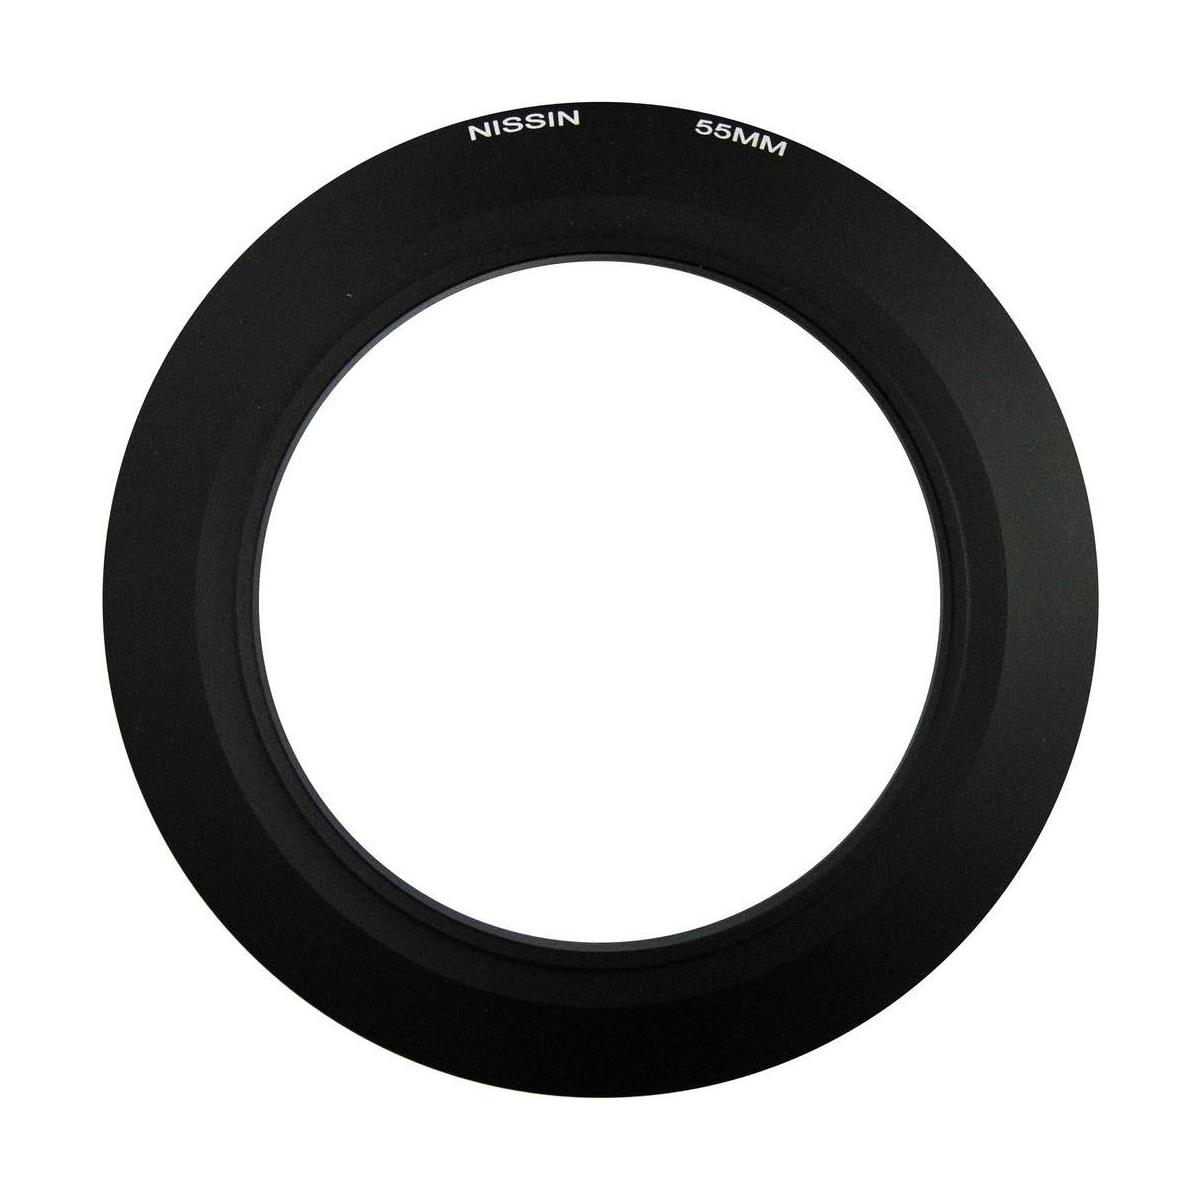 Image of Nissin 55mm Adapter Ring for MF 18 Flash